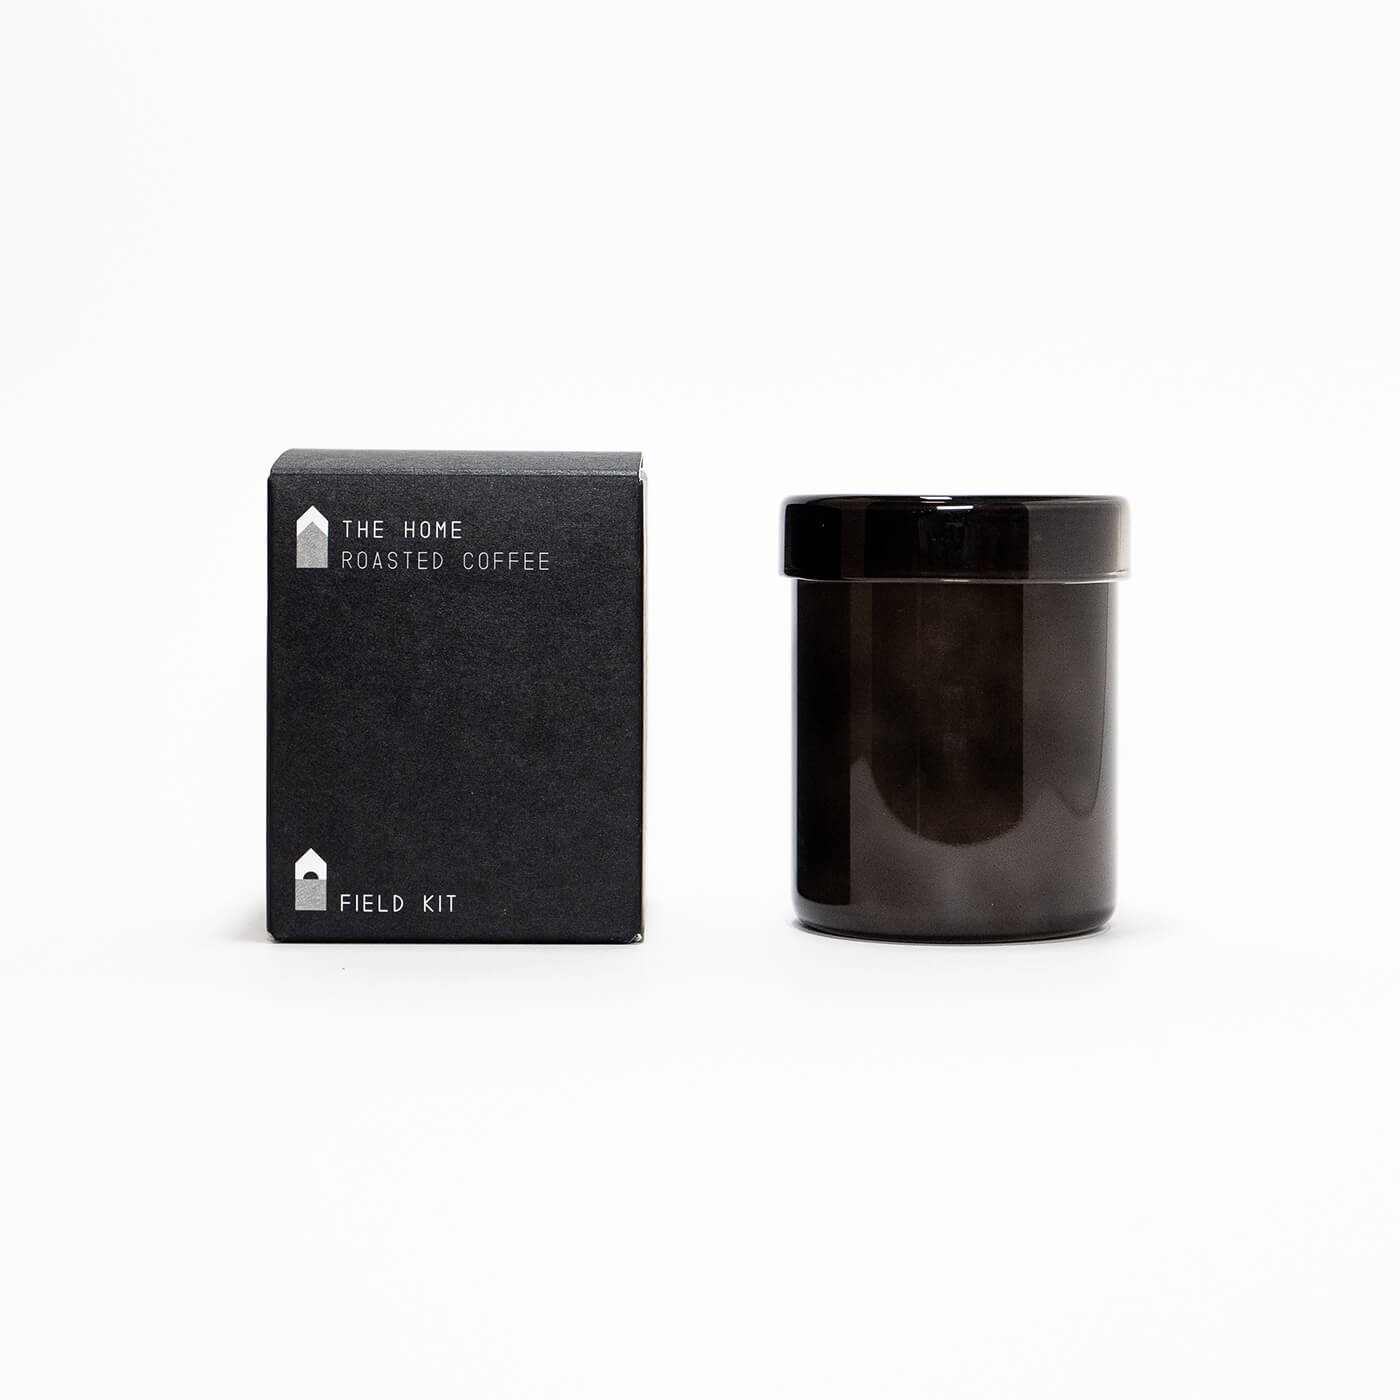 The Home Scented Candle by Field Kit